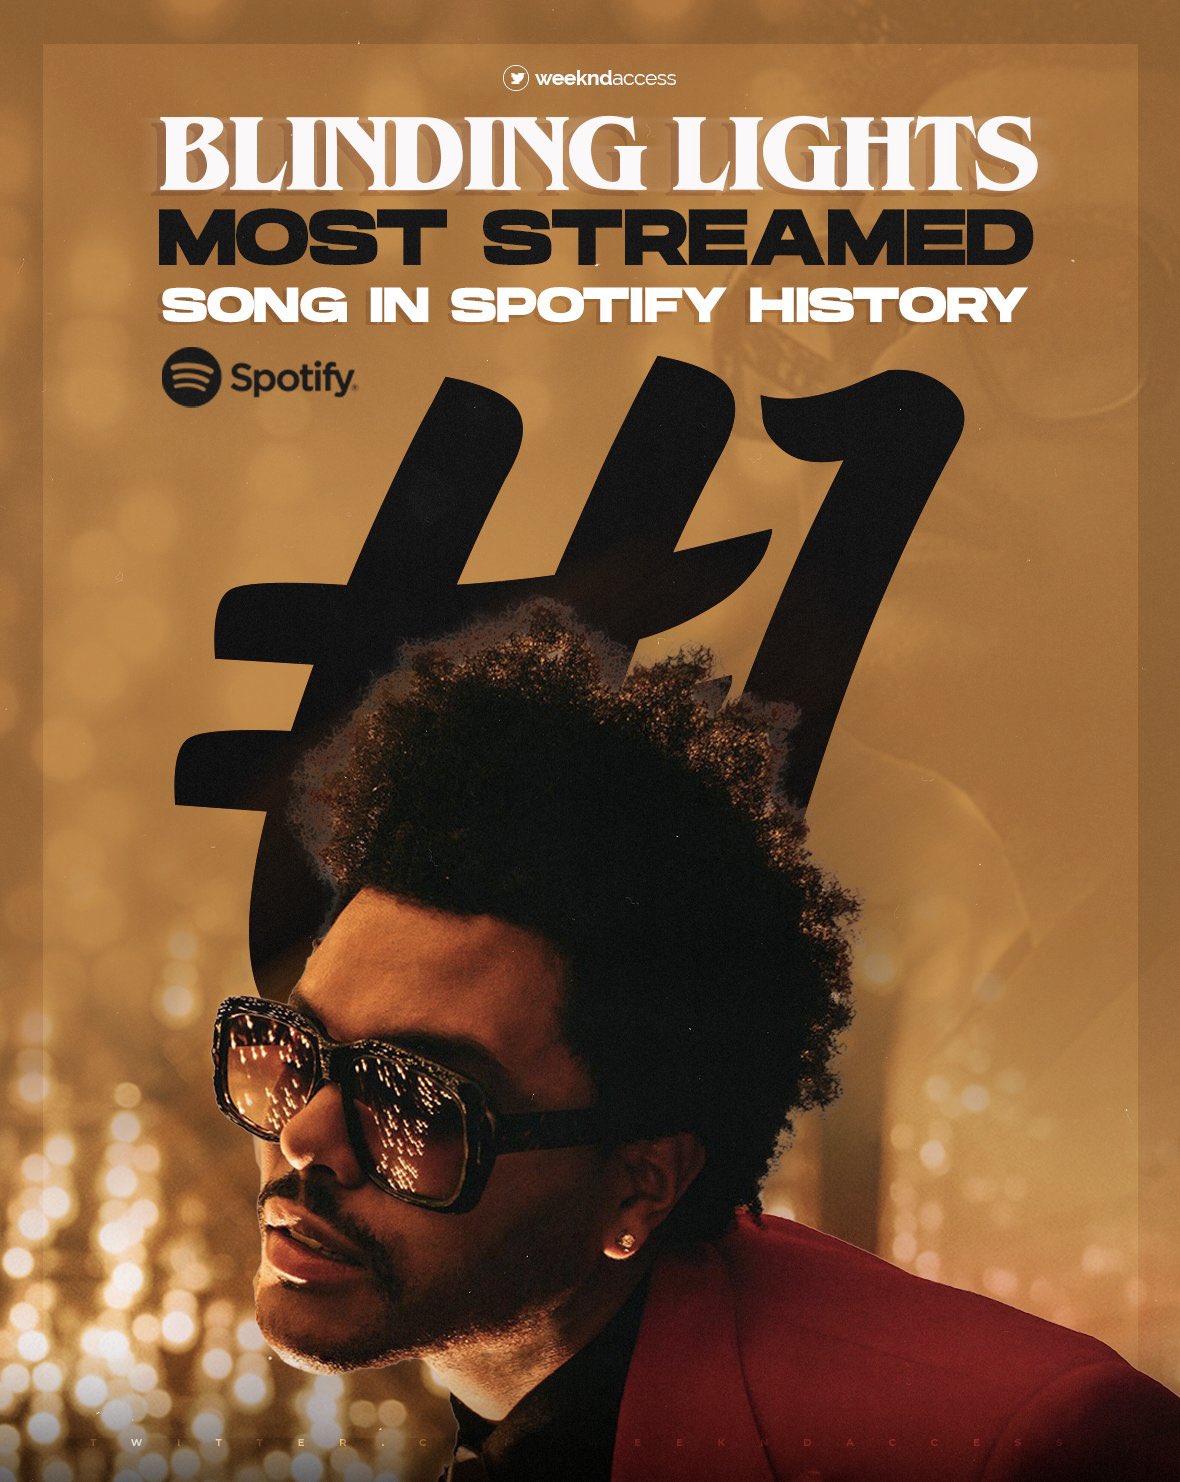 The Weeknd Access on Twitter: 'Blinding Lights' is officially the streamed song in Spotify https://t.co/7S1WfHZwpD" /